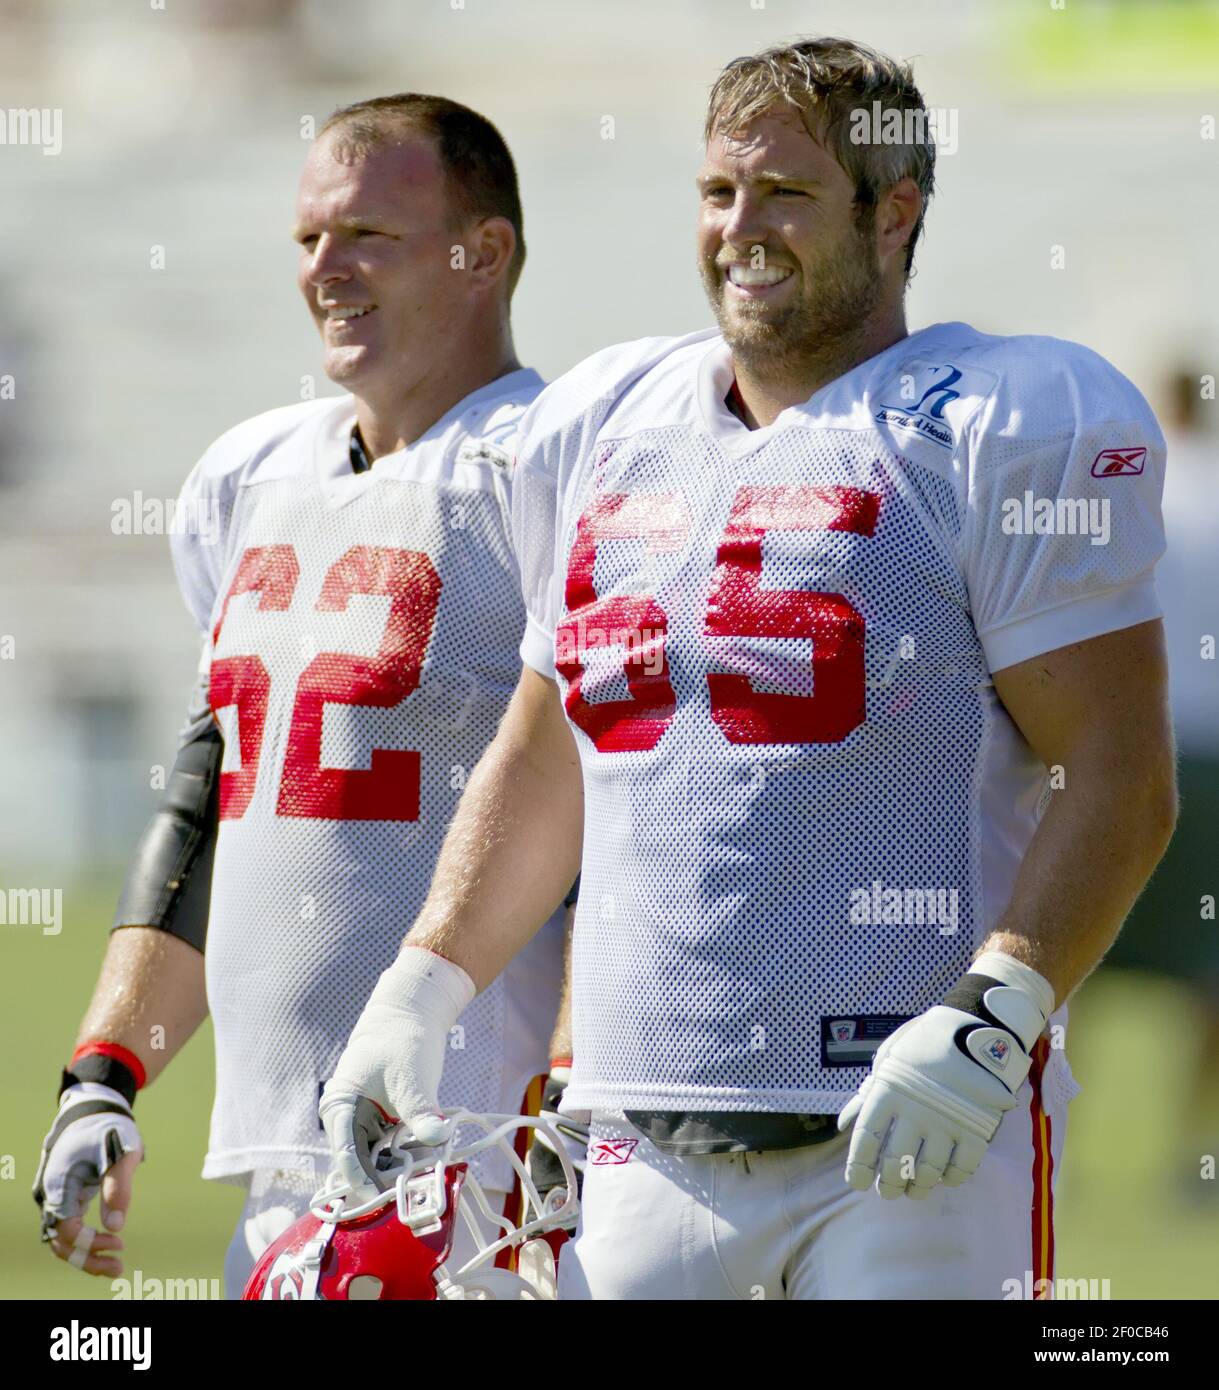 Kansas City Chiefs center Casey Wiegmann, left, and guard Ryan Lilja,  right, wait their turn at drills during practice on Tuesday morning, August  9, 2011 in St. Joseph, Missouri. (Photo by David